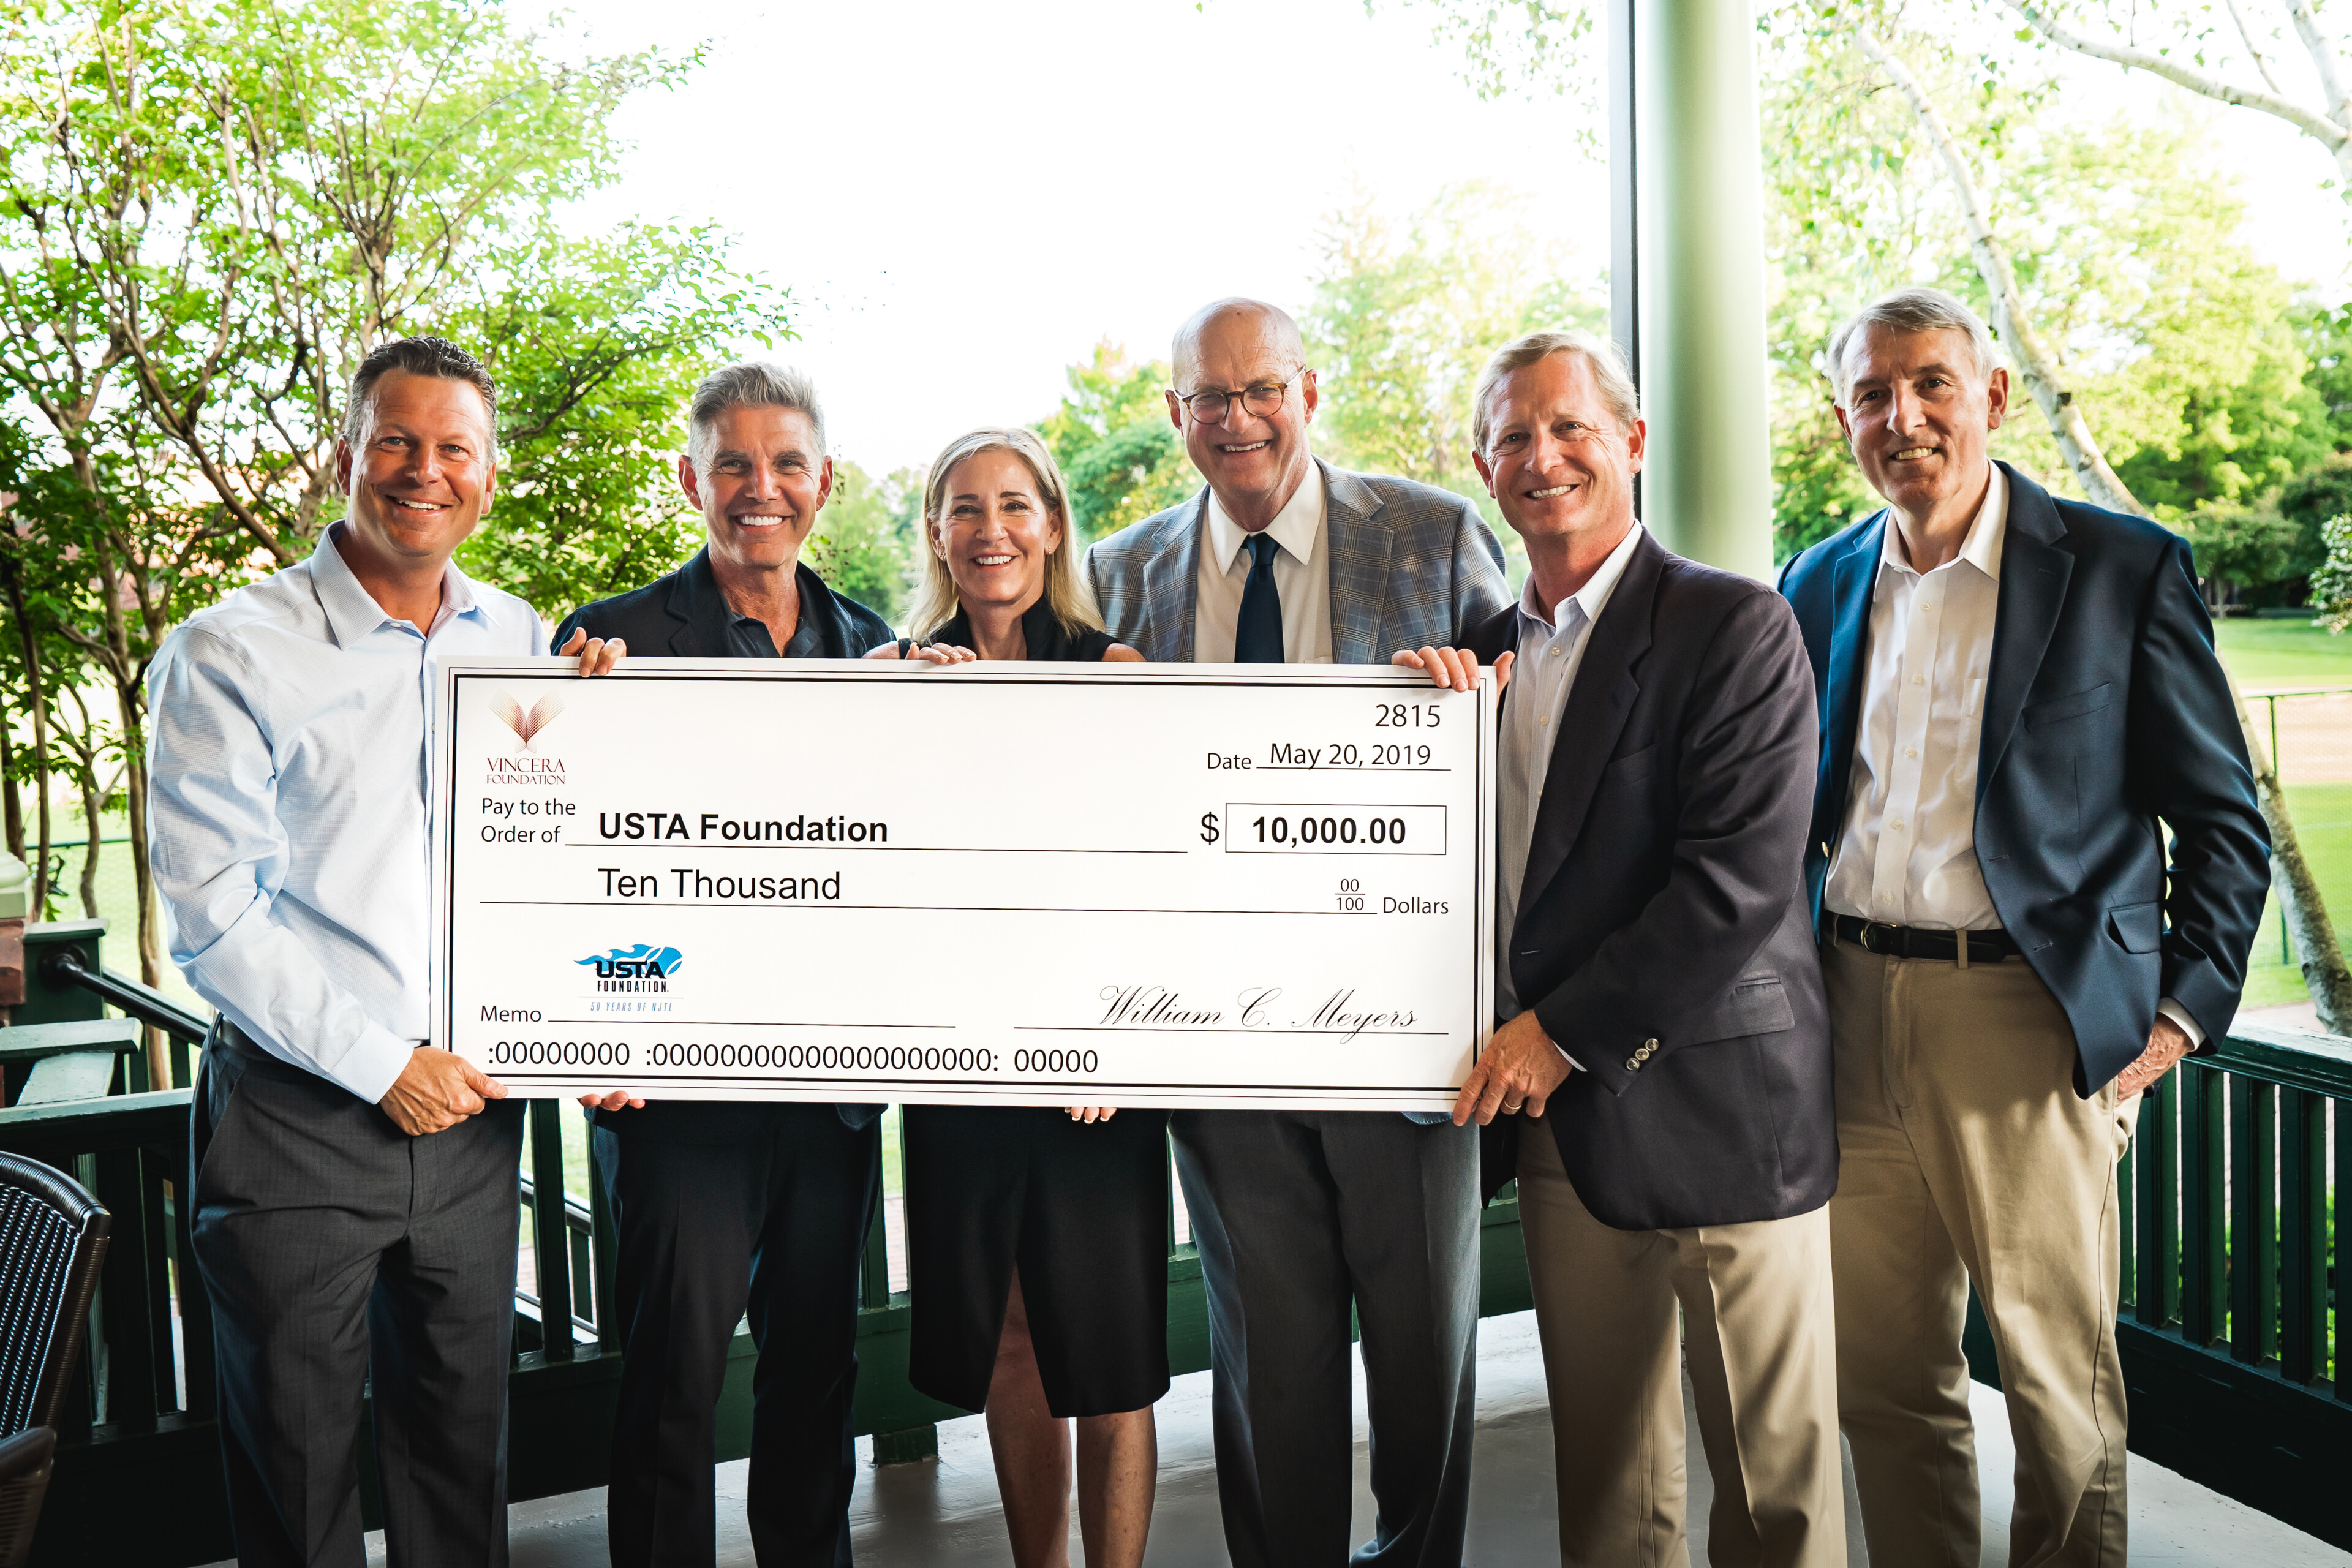 Vincera Foundation Supports the USTA Foundation at Merion Cricket Club, Haverford, PA